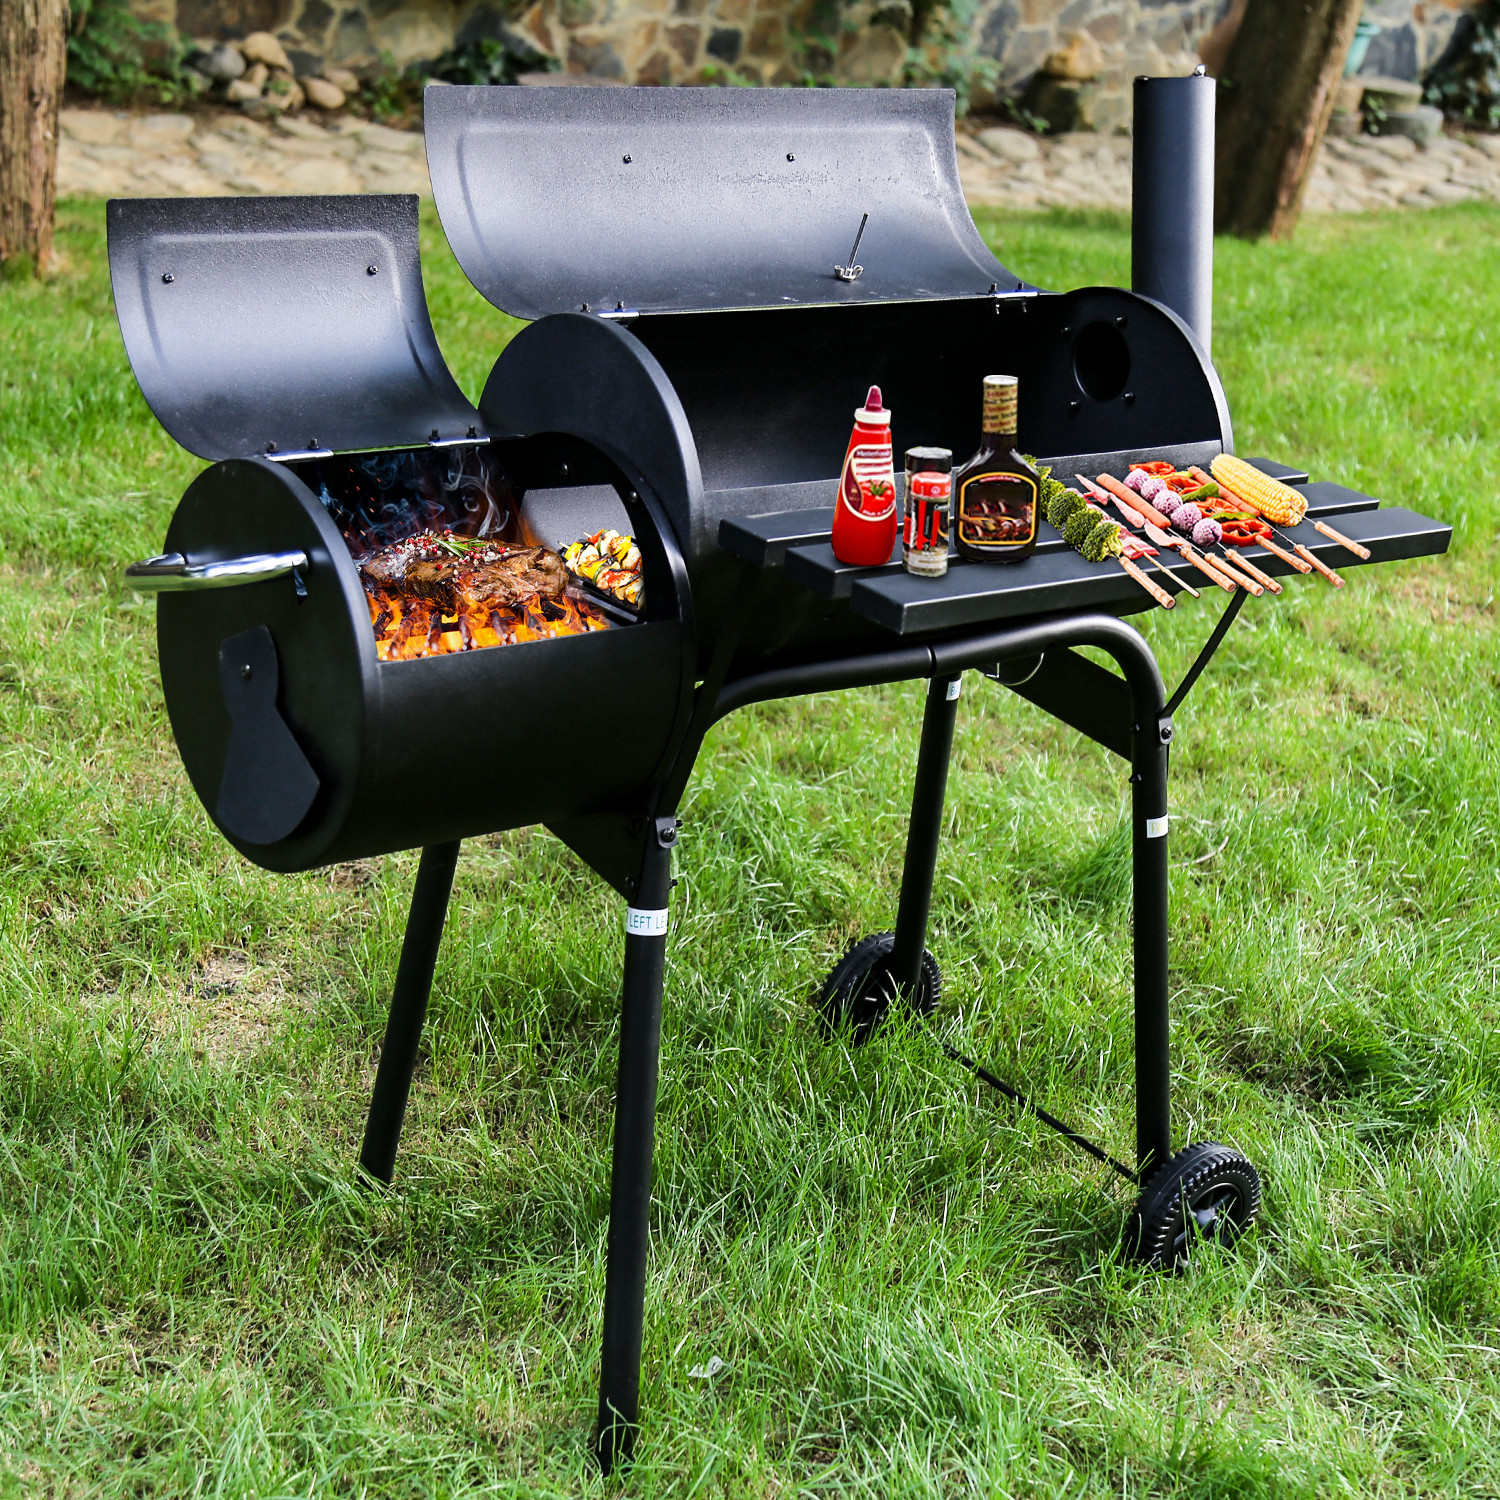 Backyard Barbecue Grill
 BBQ Grill Charcoal Barbecue Outdoor Pit Patio Backyard